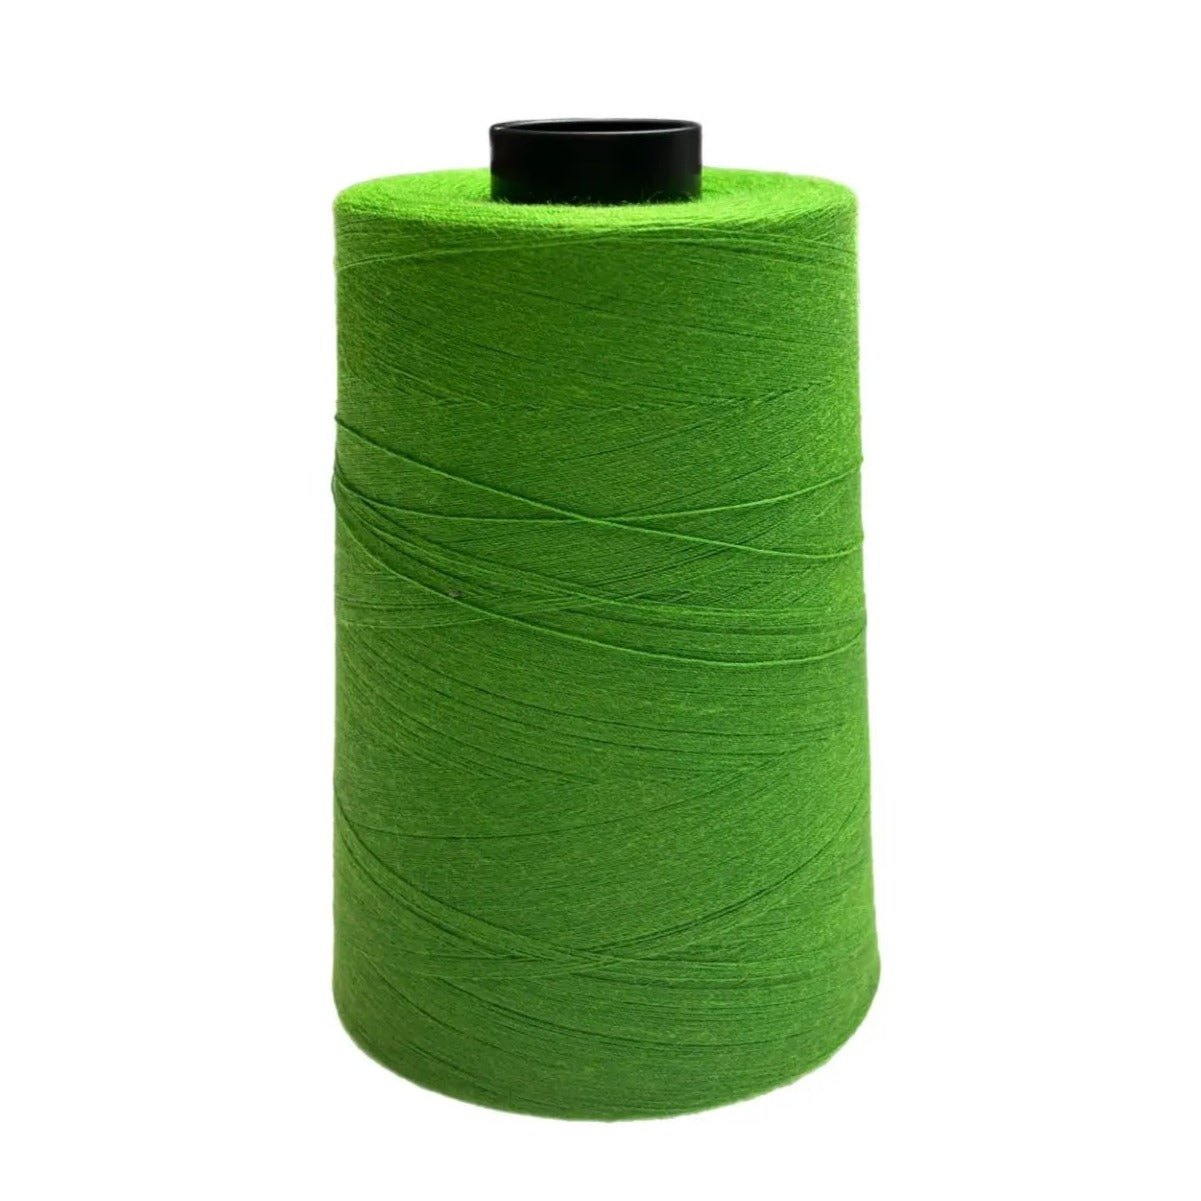 W32046 Grass Green Perma Core Tex 30 Polyester Thread American & Efird Permacore